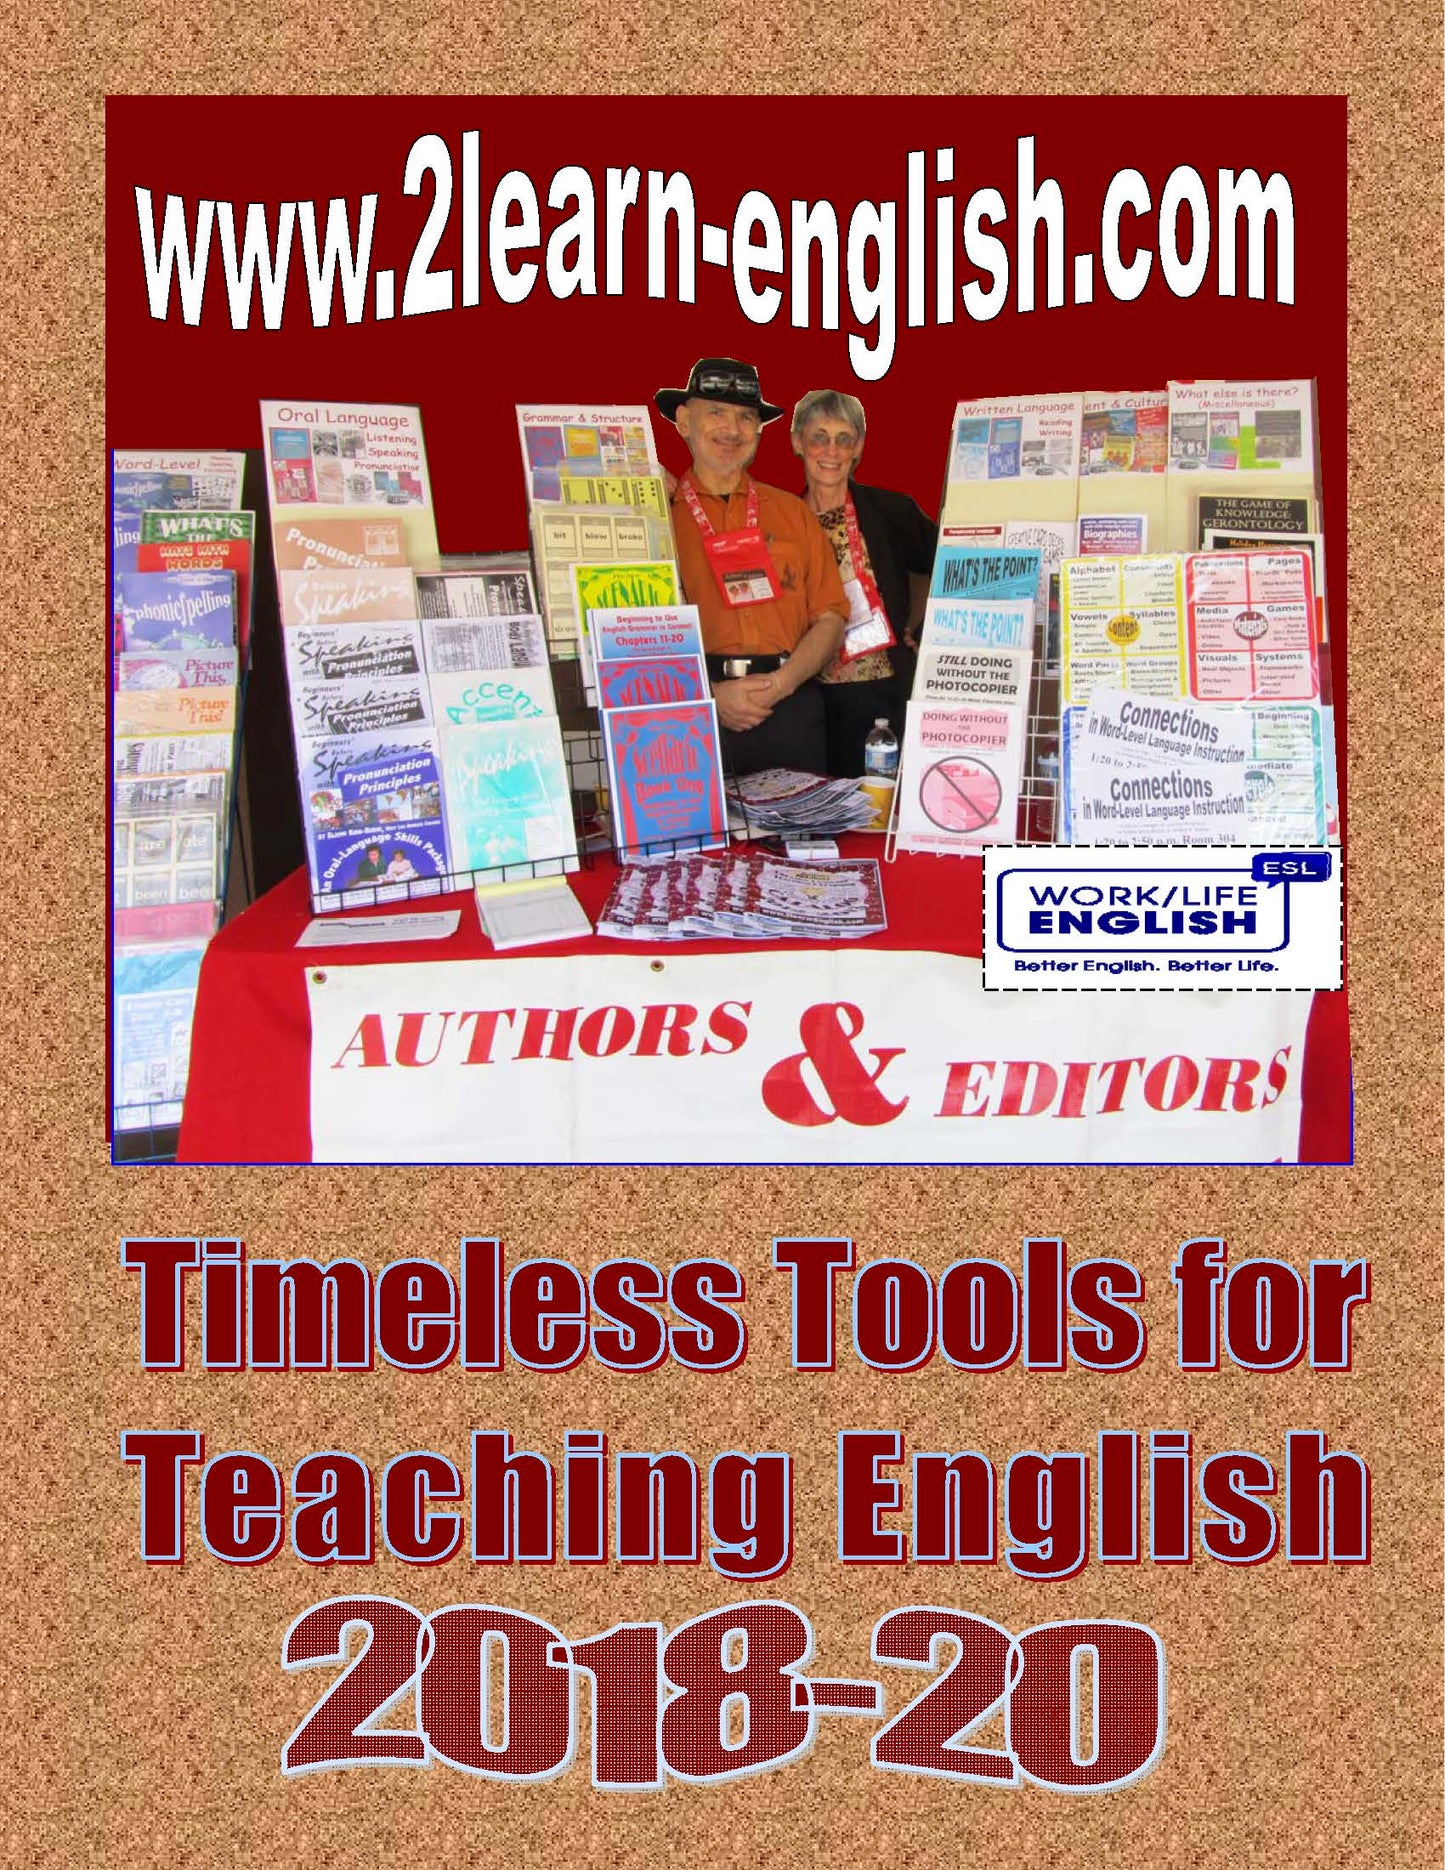 0.1 CATALOG OF TEACHING - LEARNING TOOLS